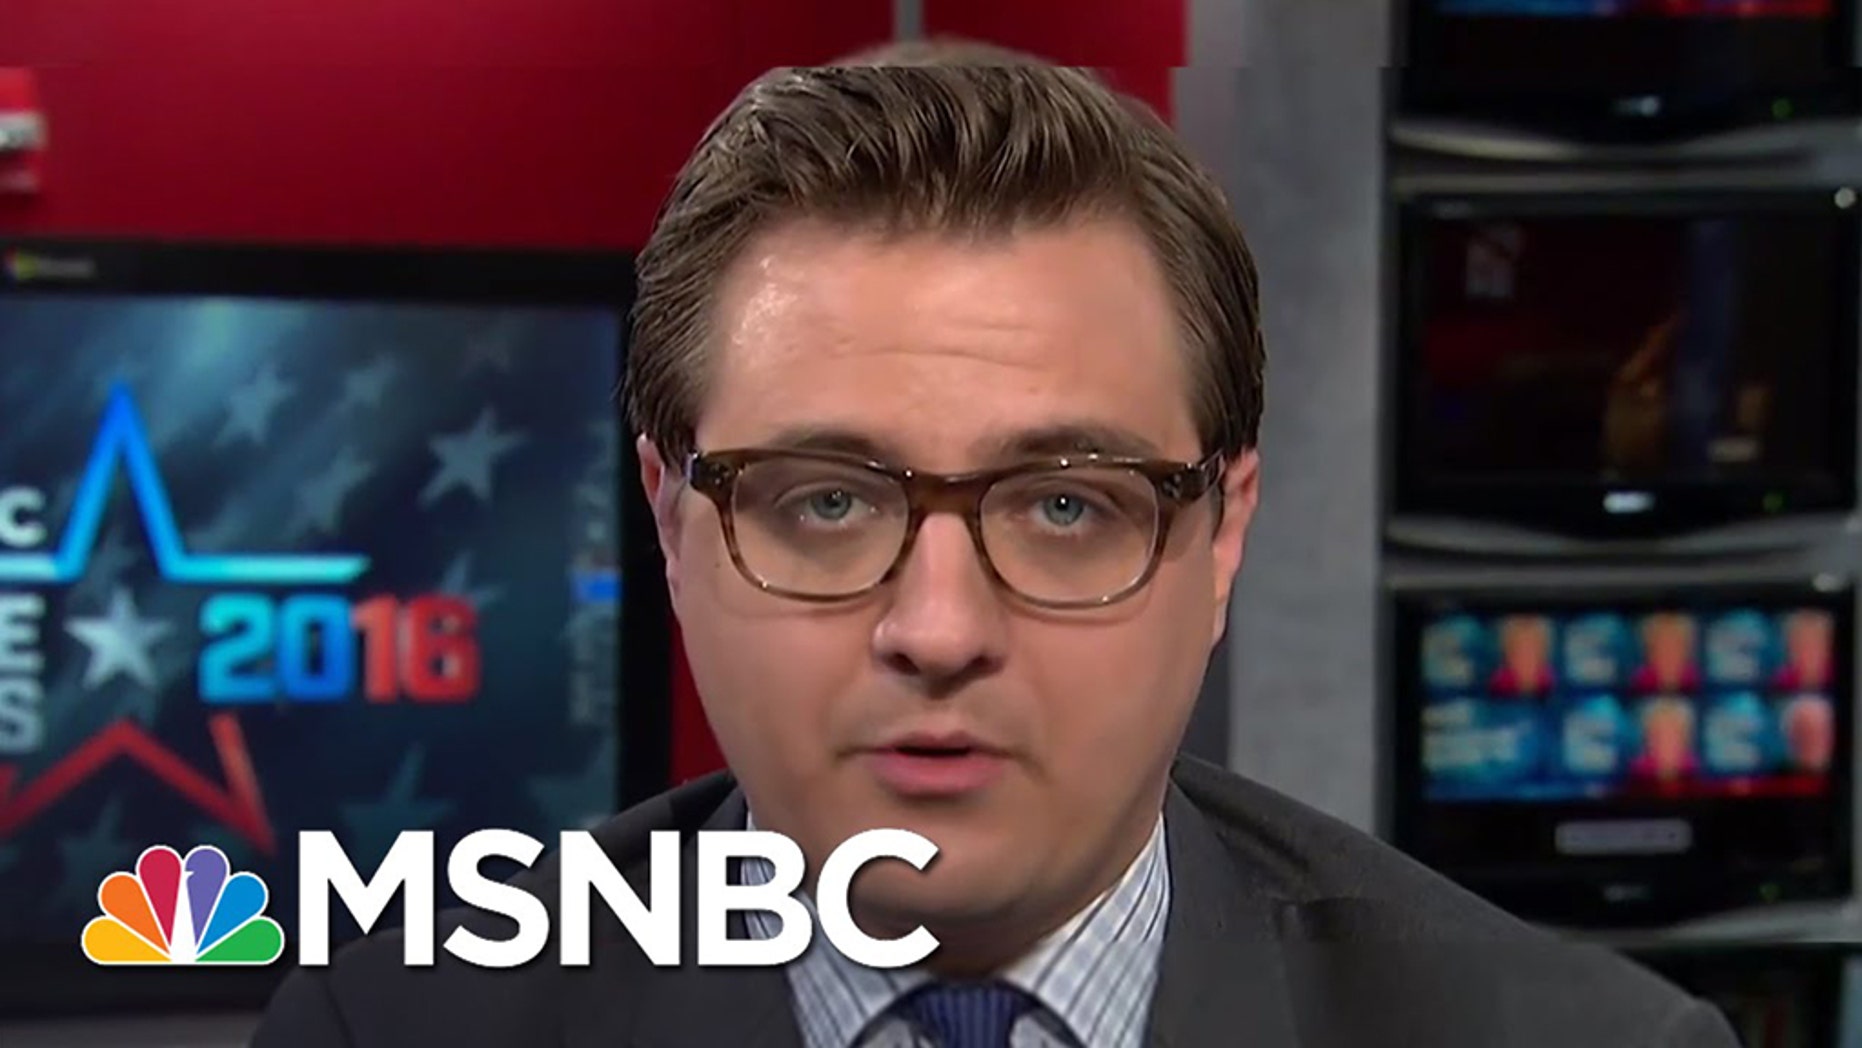 MSNBC’s Chris Hayes has ‘fear’ Trump will launch military strike to distract ...